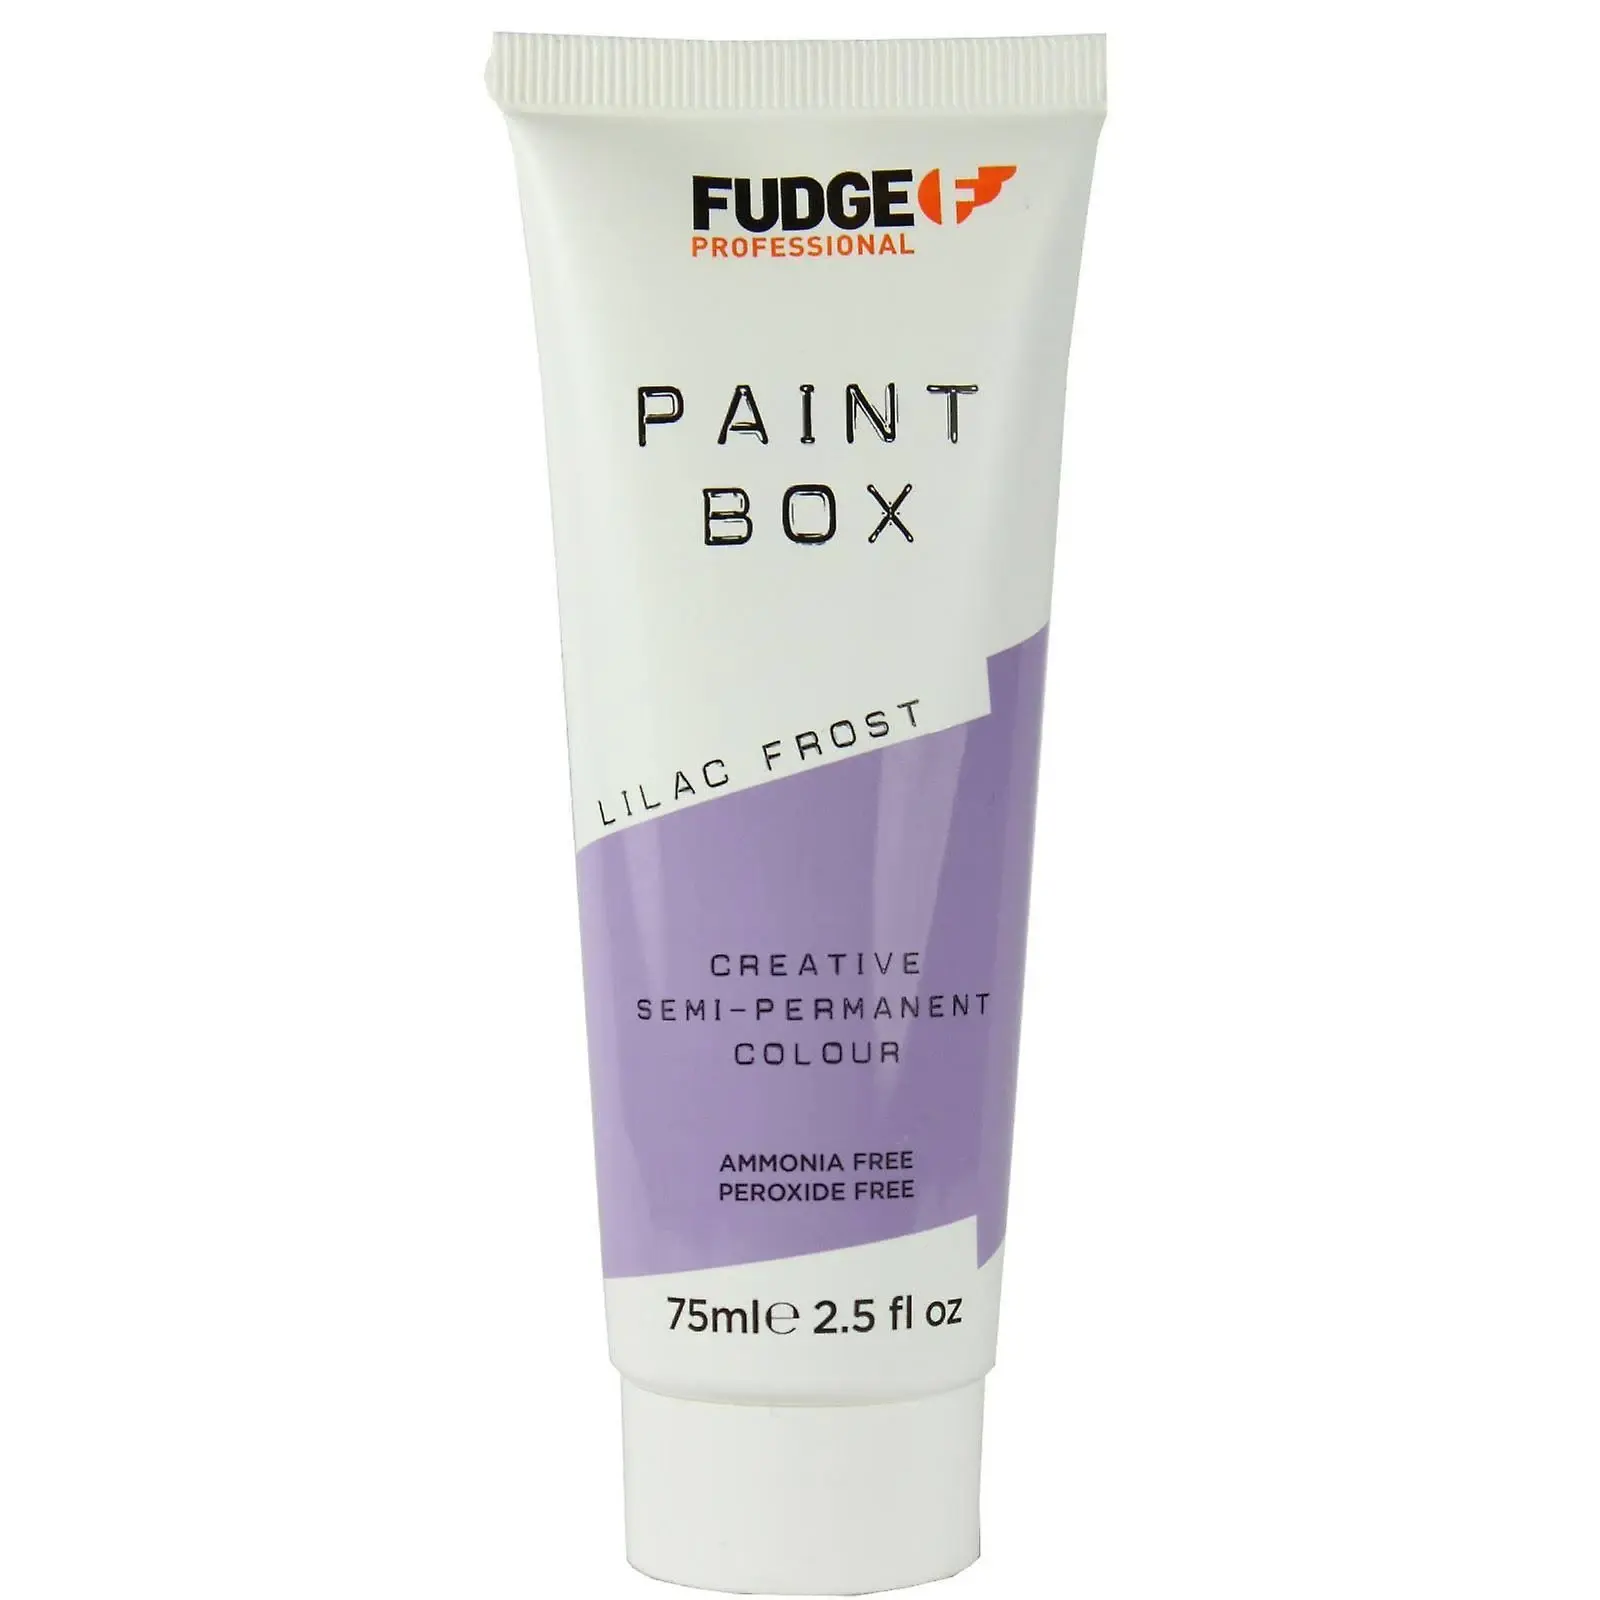 Fudge Paintbox, Lilac Frost 75 ml